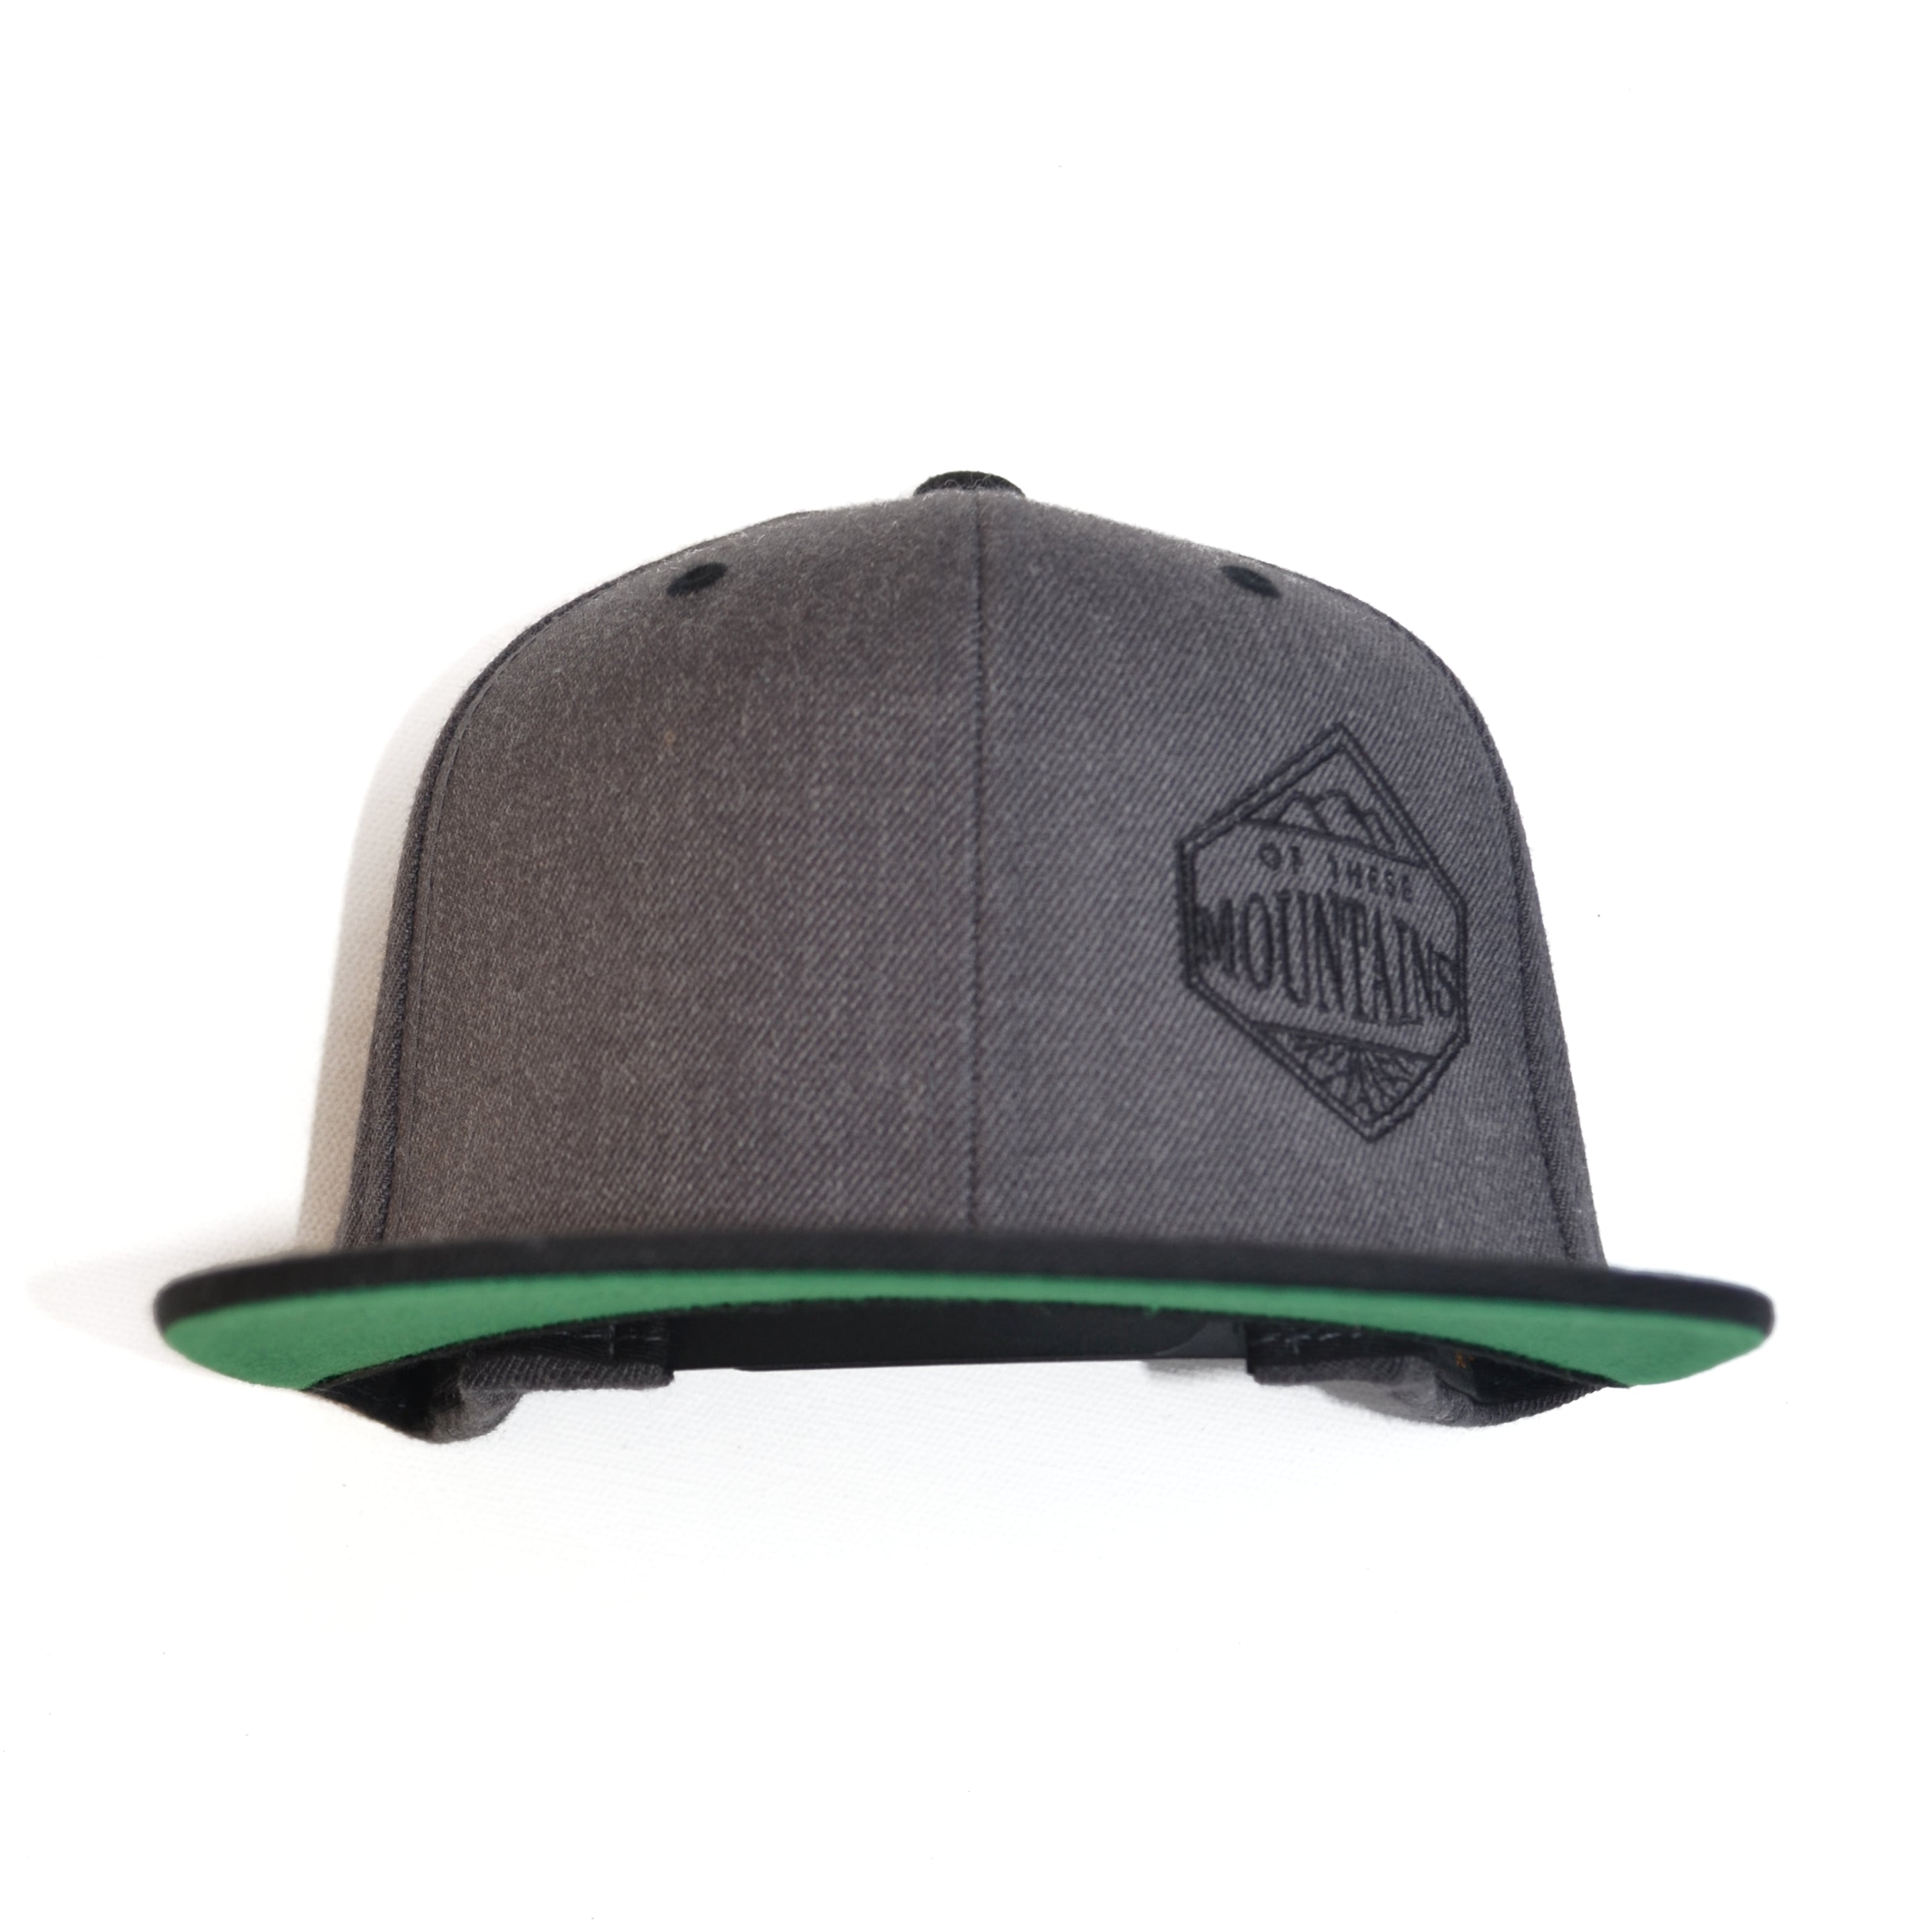 Of These Mountains Classic Offset Cap (Charcoal)